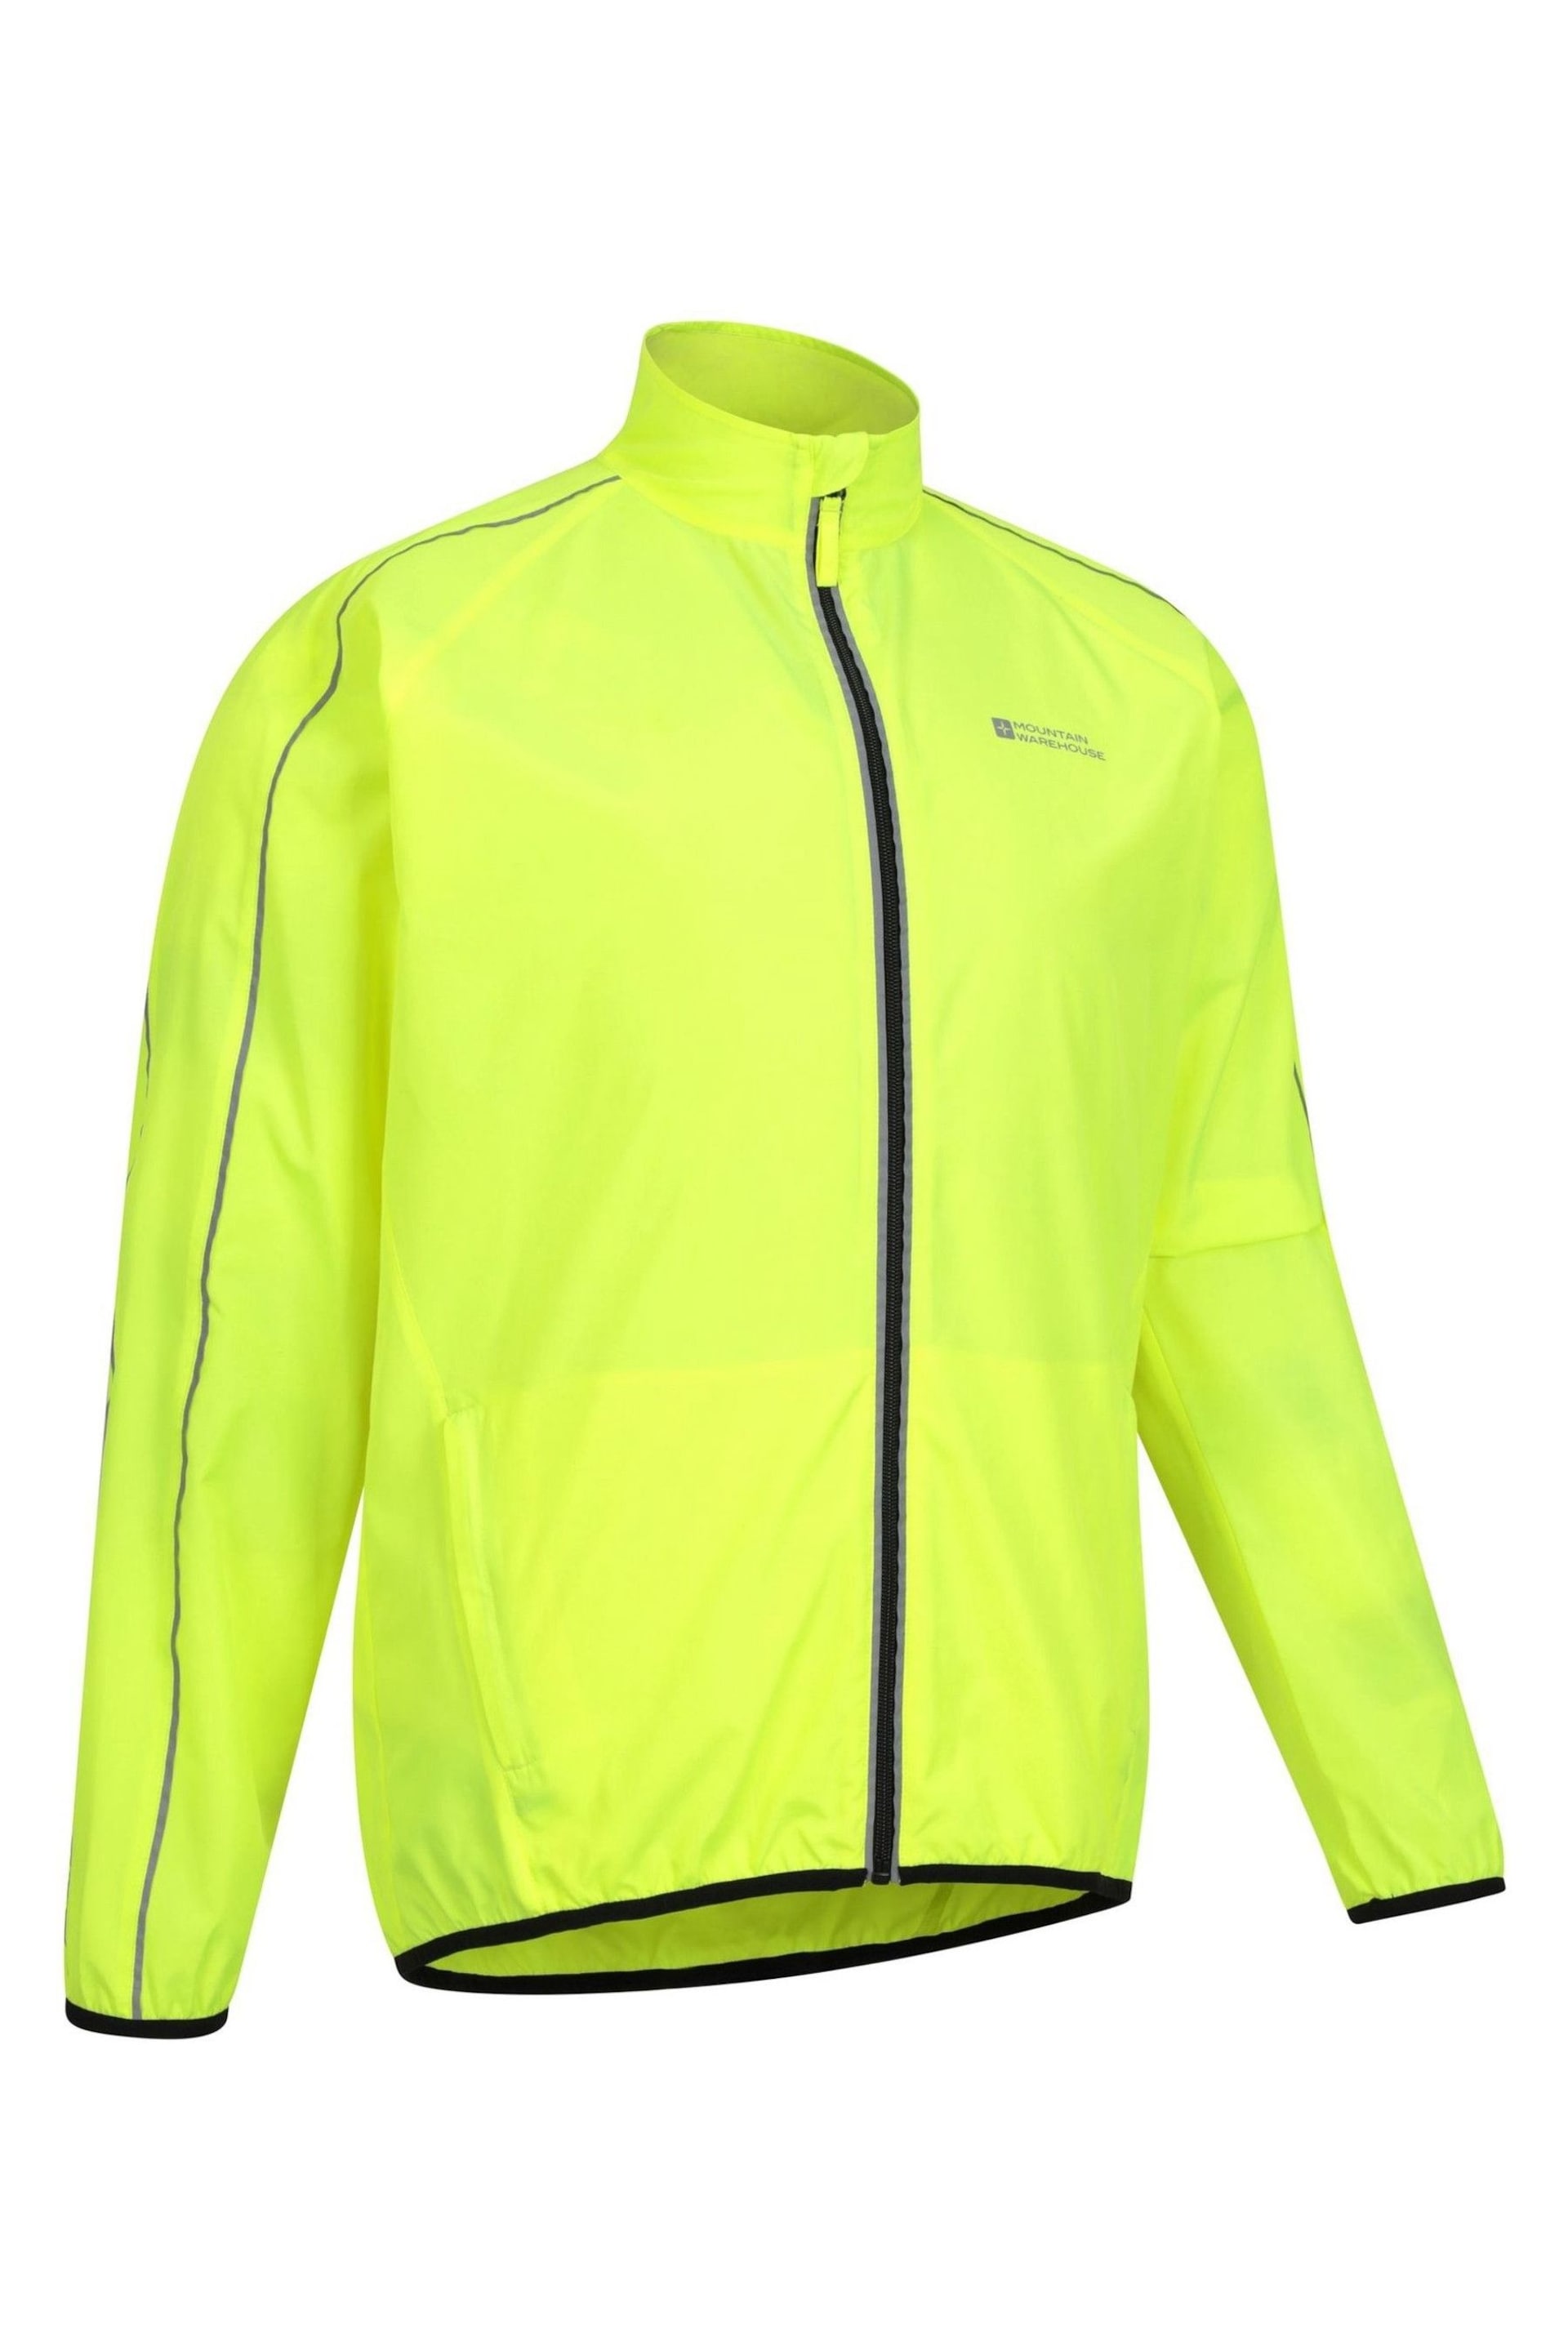 Mountain Warehouse Yellow Mens Force Reflective Water Resistant Running and Cycling Jacket - Image 3 of 5